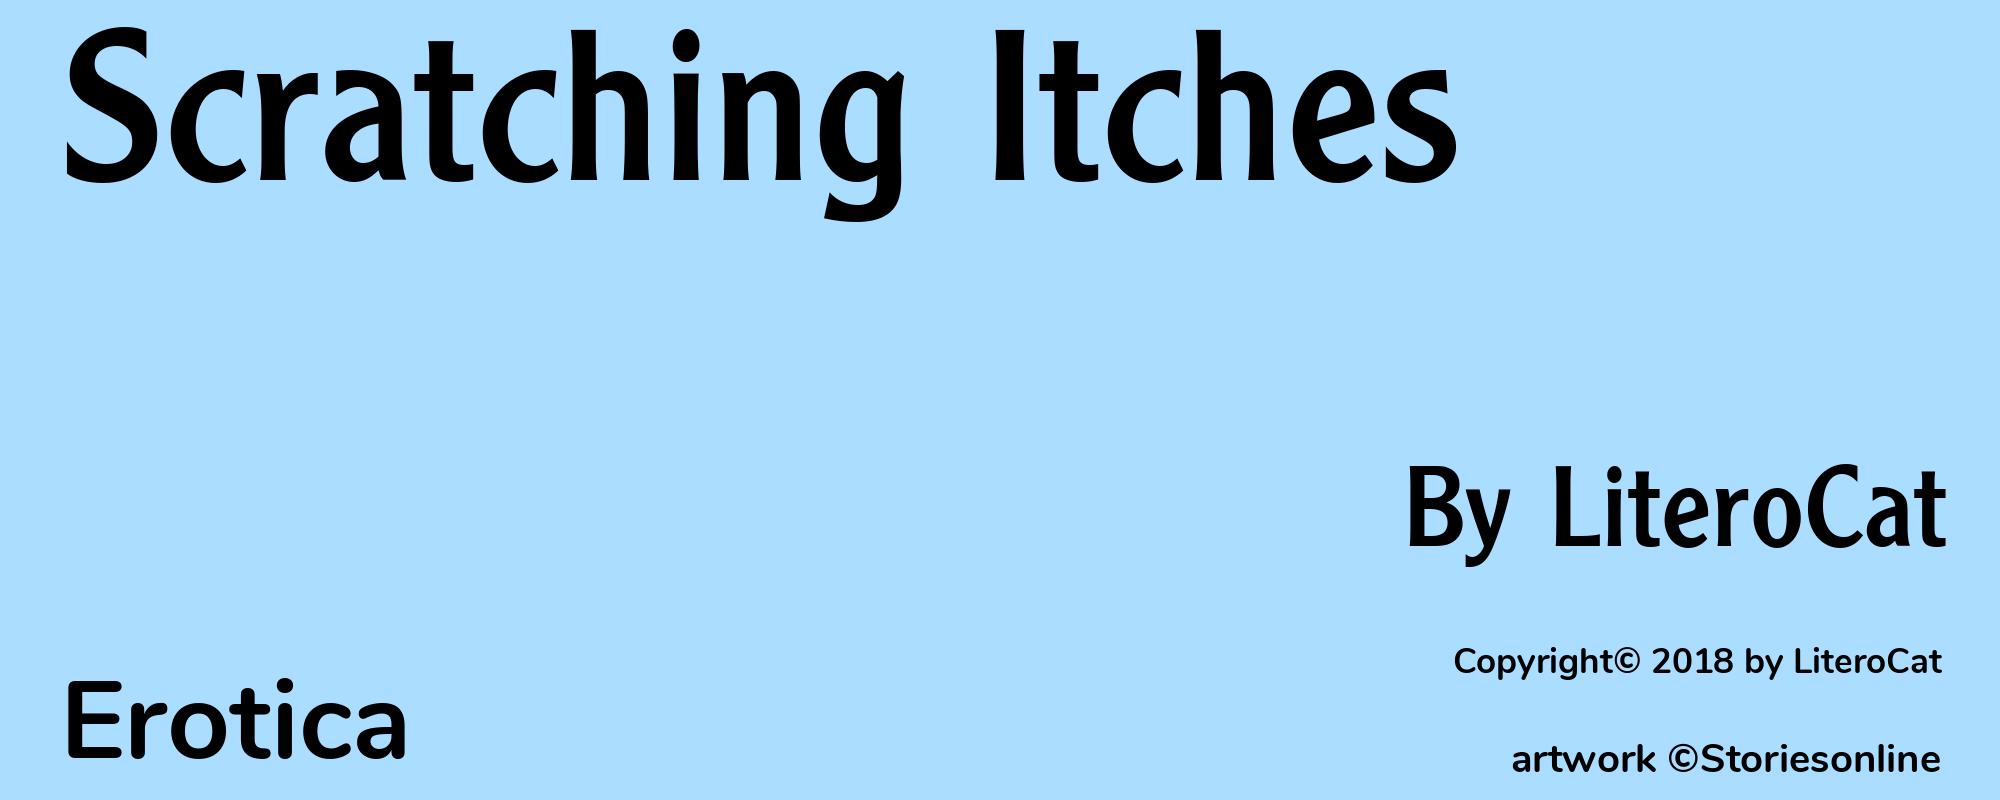 Scratching Itches - Cover